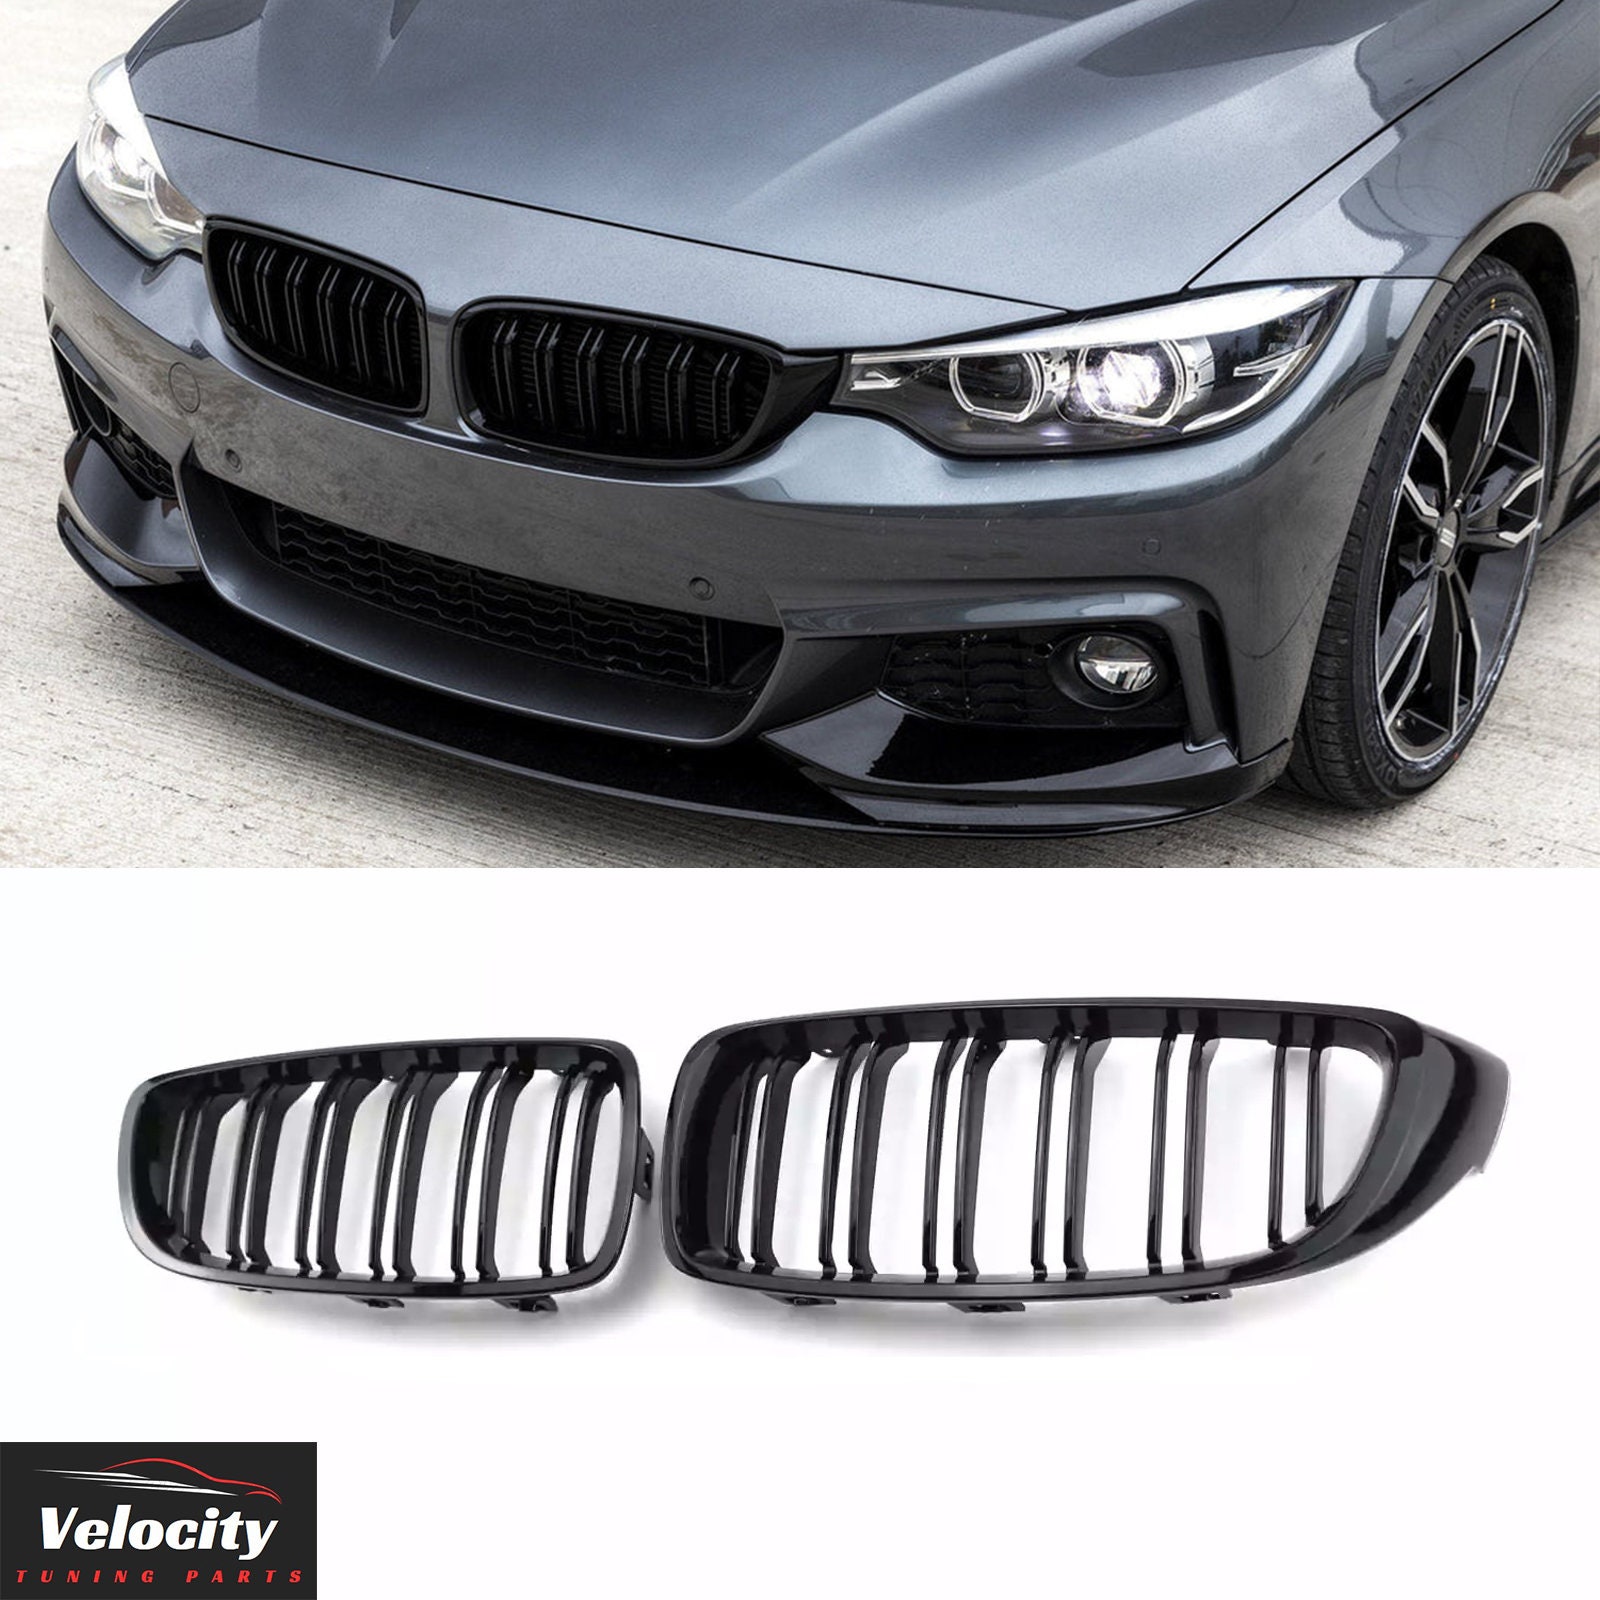 Gloss Black For BMW F32 F36 2014-2016 4 Series Front Bumper Kidney